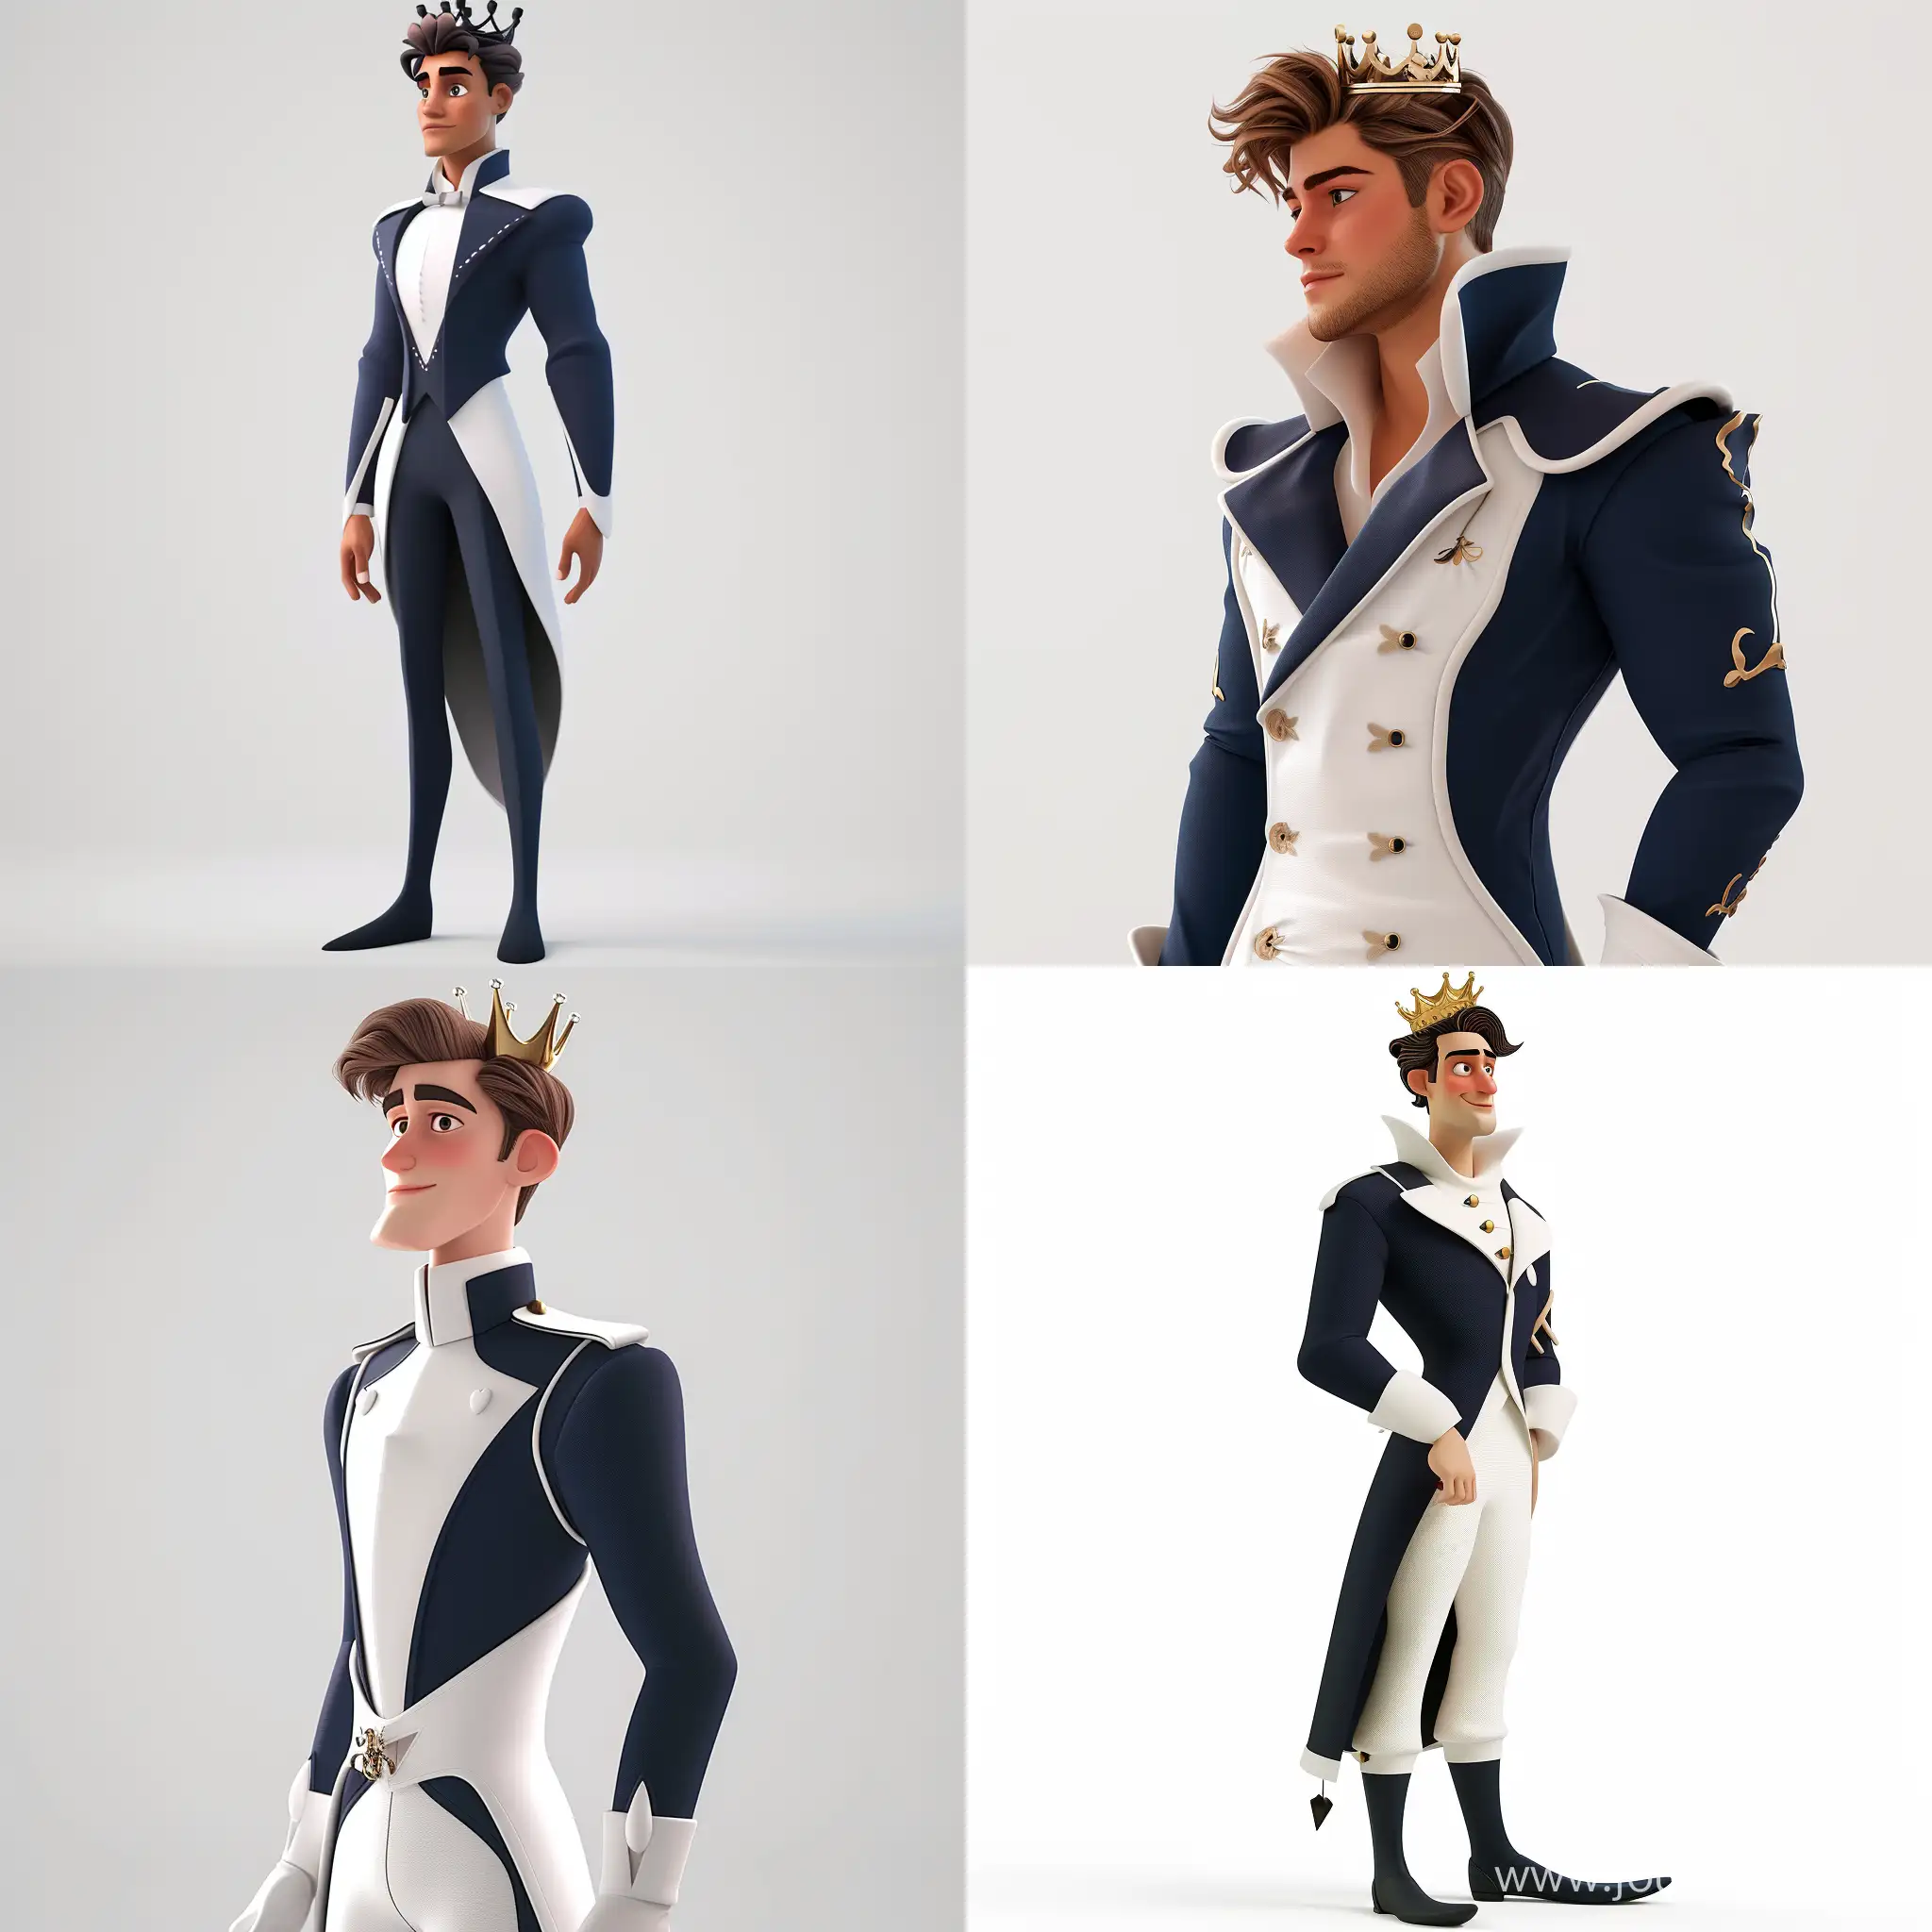 3d Cartoonic Character Design, Disney Studio Style: A Man Wearing Modern Clothes: Navy Blue & White Clothes Details, Crown on Head, Looking to the Left, Cinematic Pose, Full Body Shot,White Background, Vectorize, Blender Software, High Precision-- style raw